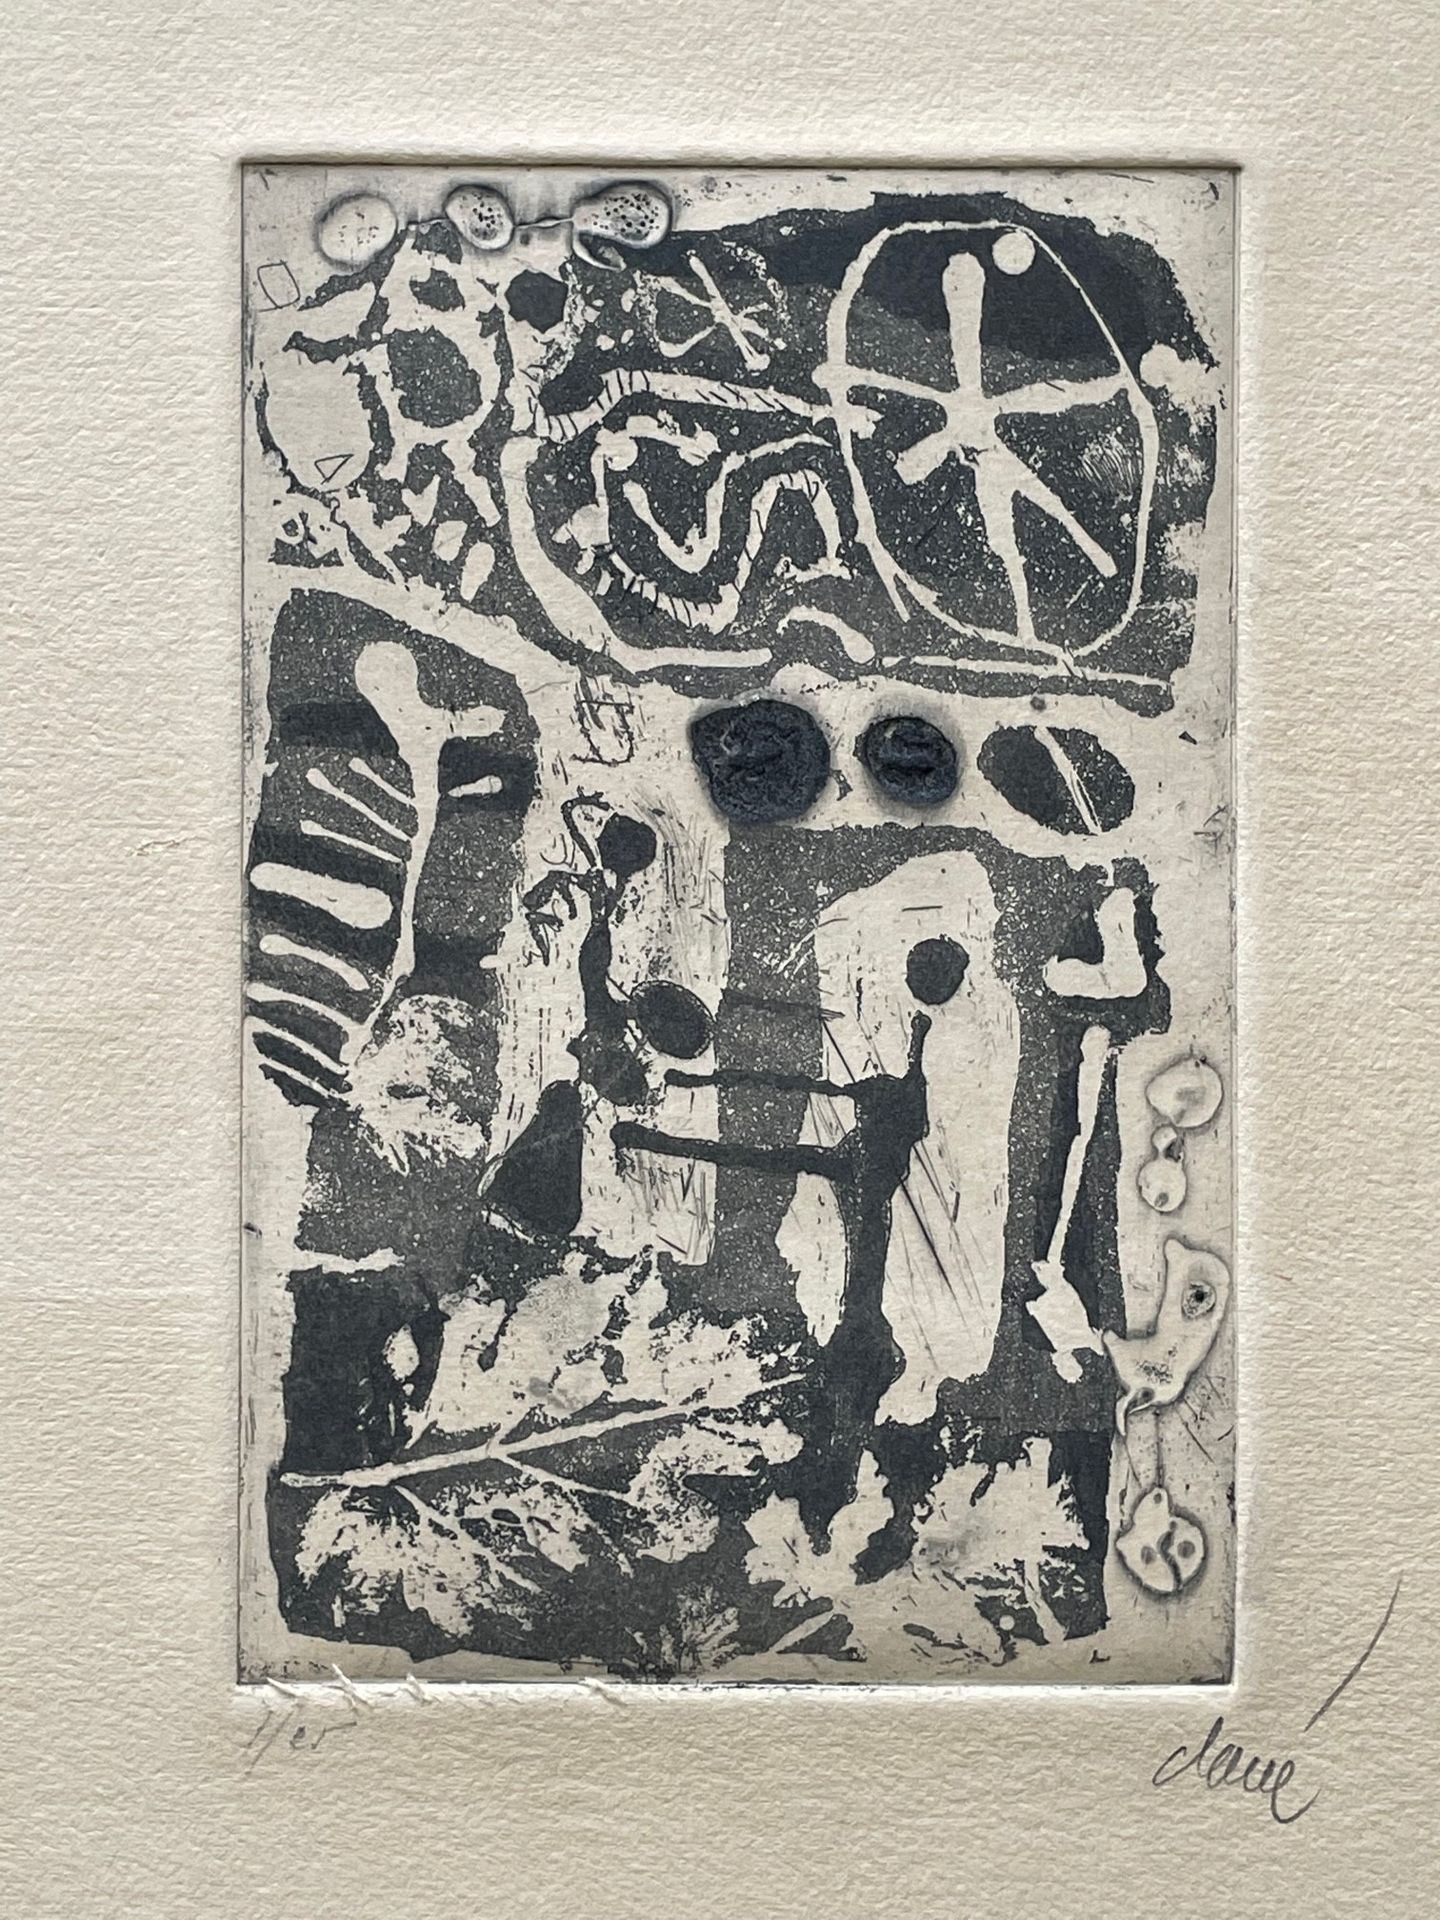 Null Antoni CLAVE (1913-2005)
Abstract composition
Etching or carborundum engrav&hellip;